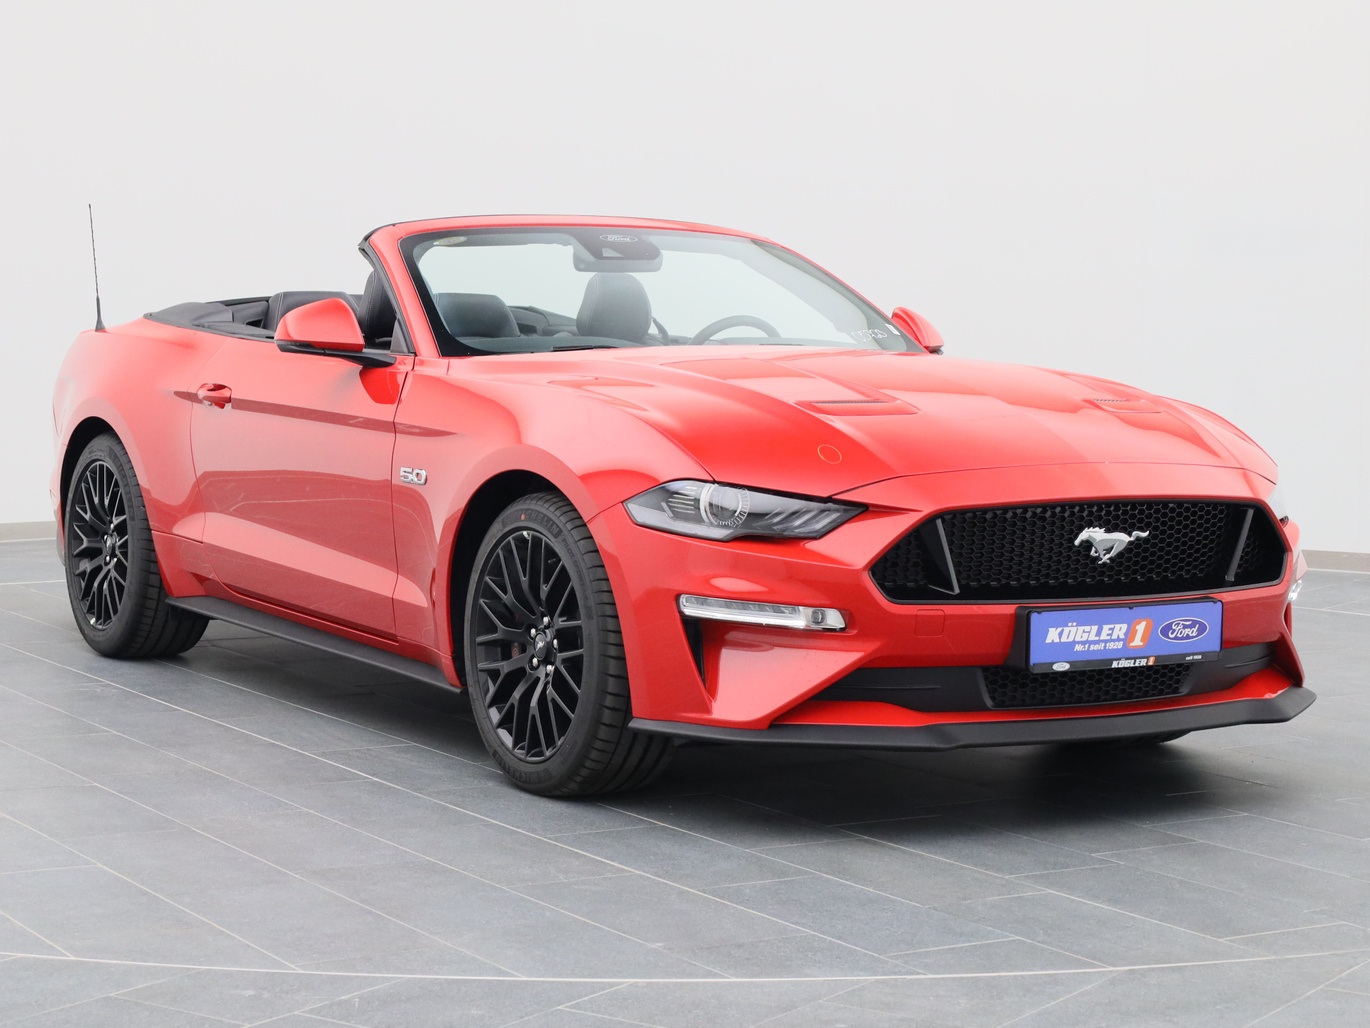  Ford Mustang GT Cabrio V8 450PS Aut. / Premium 2 in Race-rot 